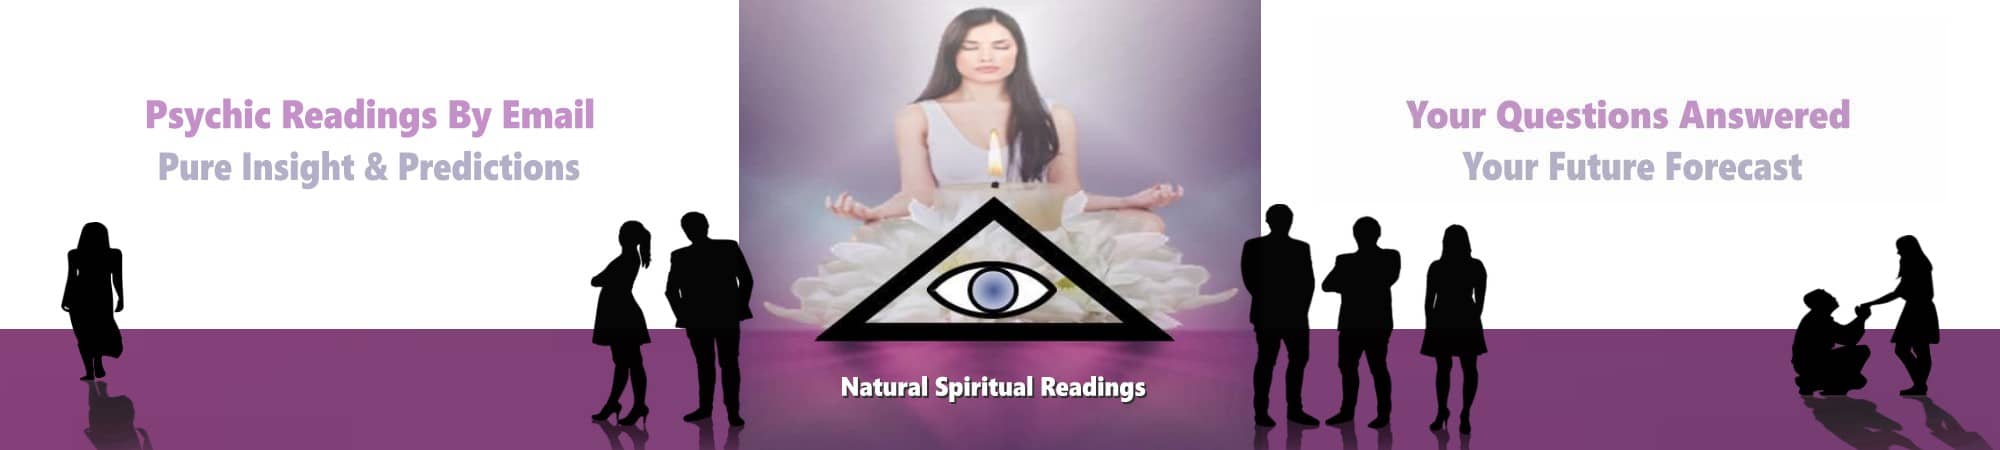 email psychic readings page